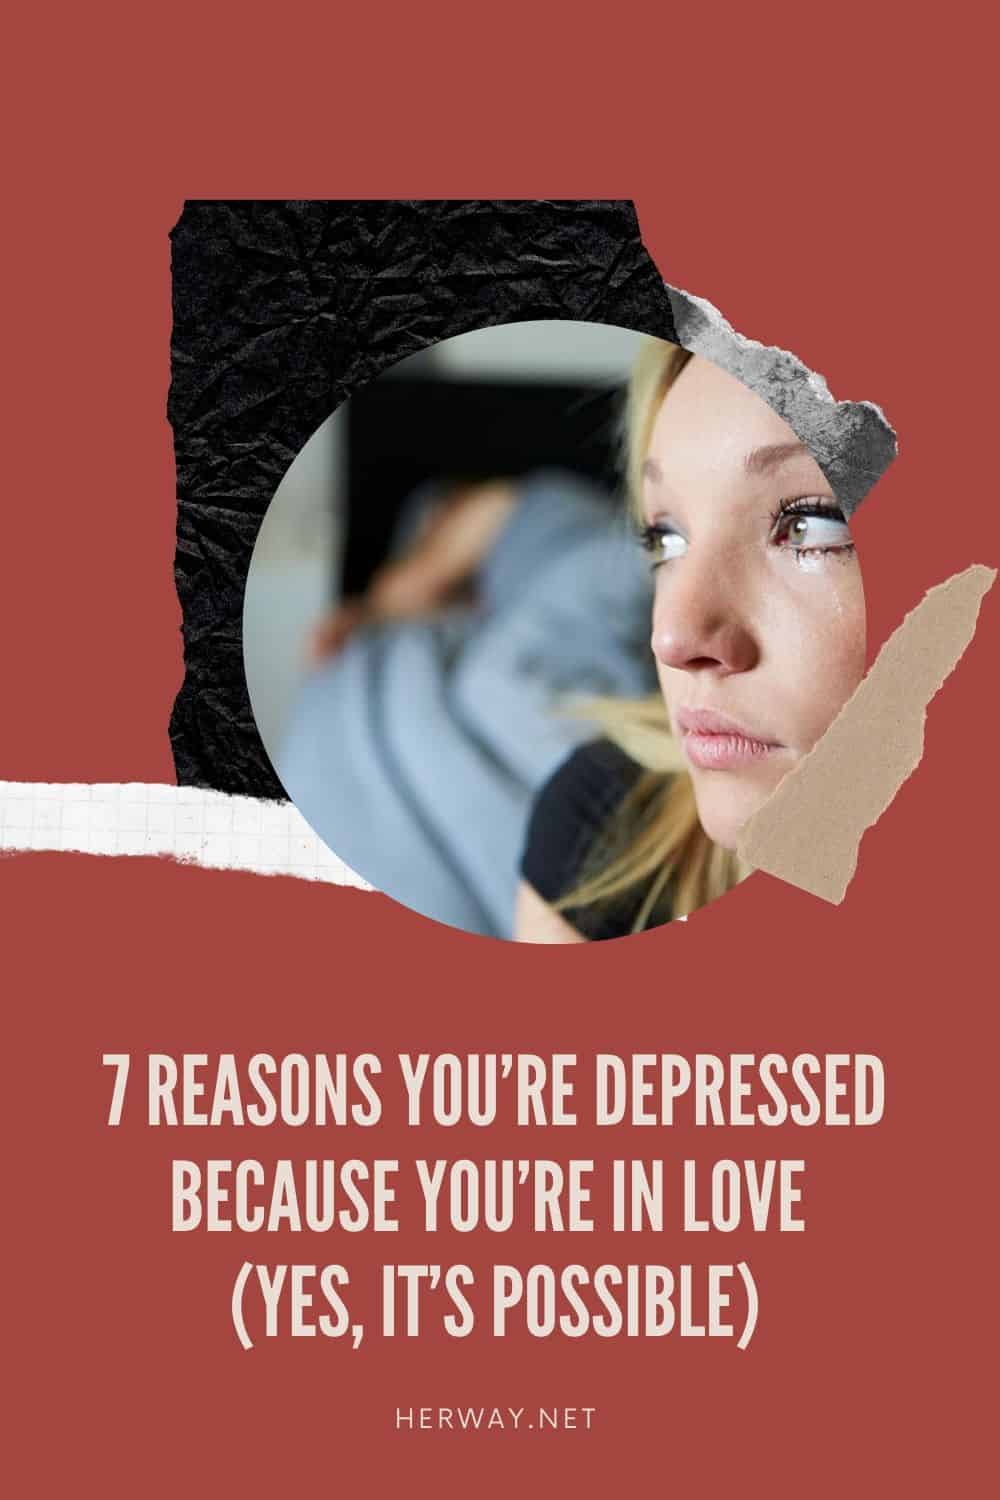 7 Reasons You’re Depressed Because You’re In Love (Yes, It’s Possible)